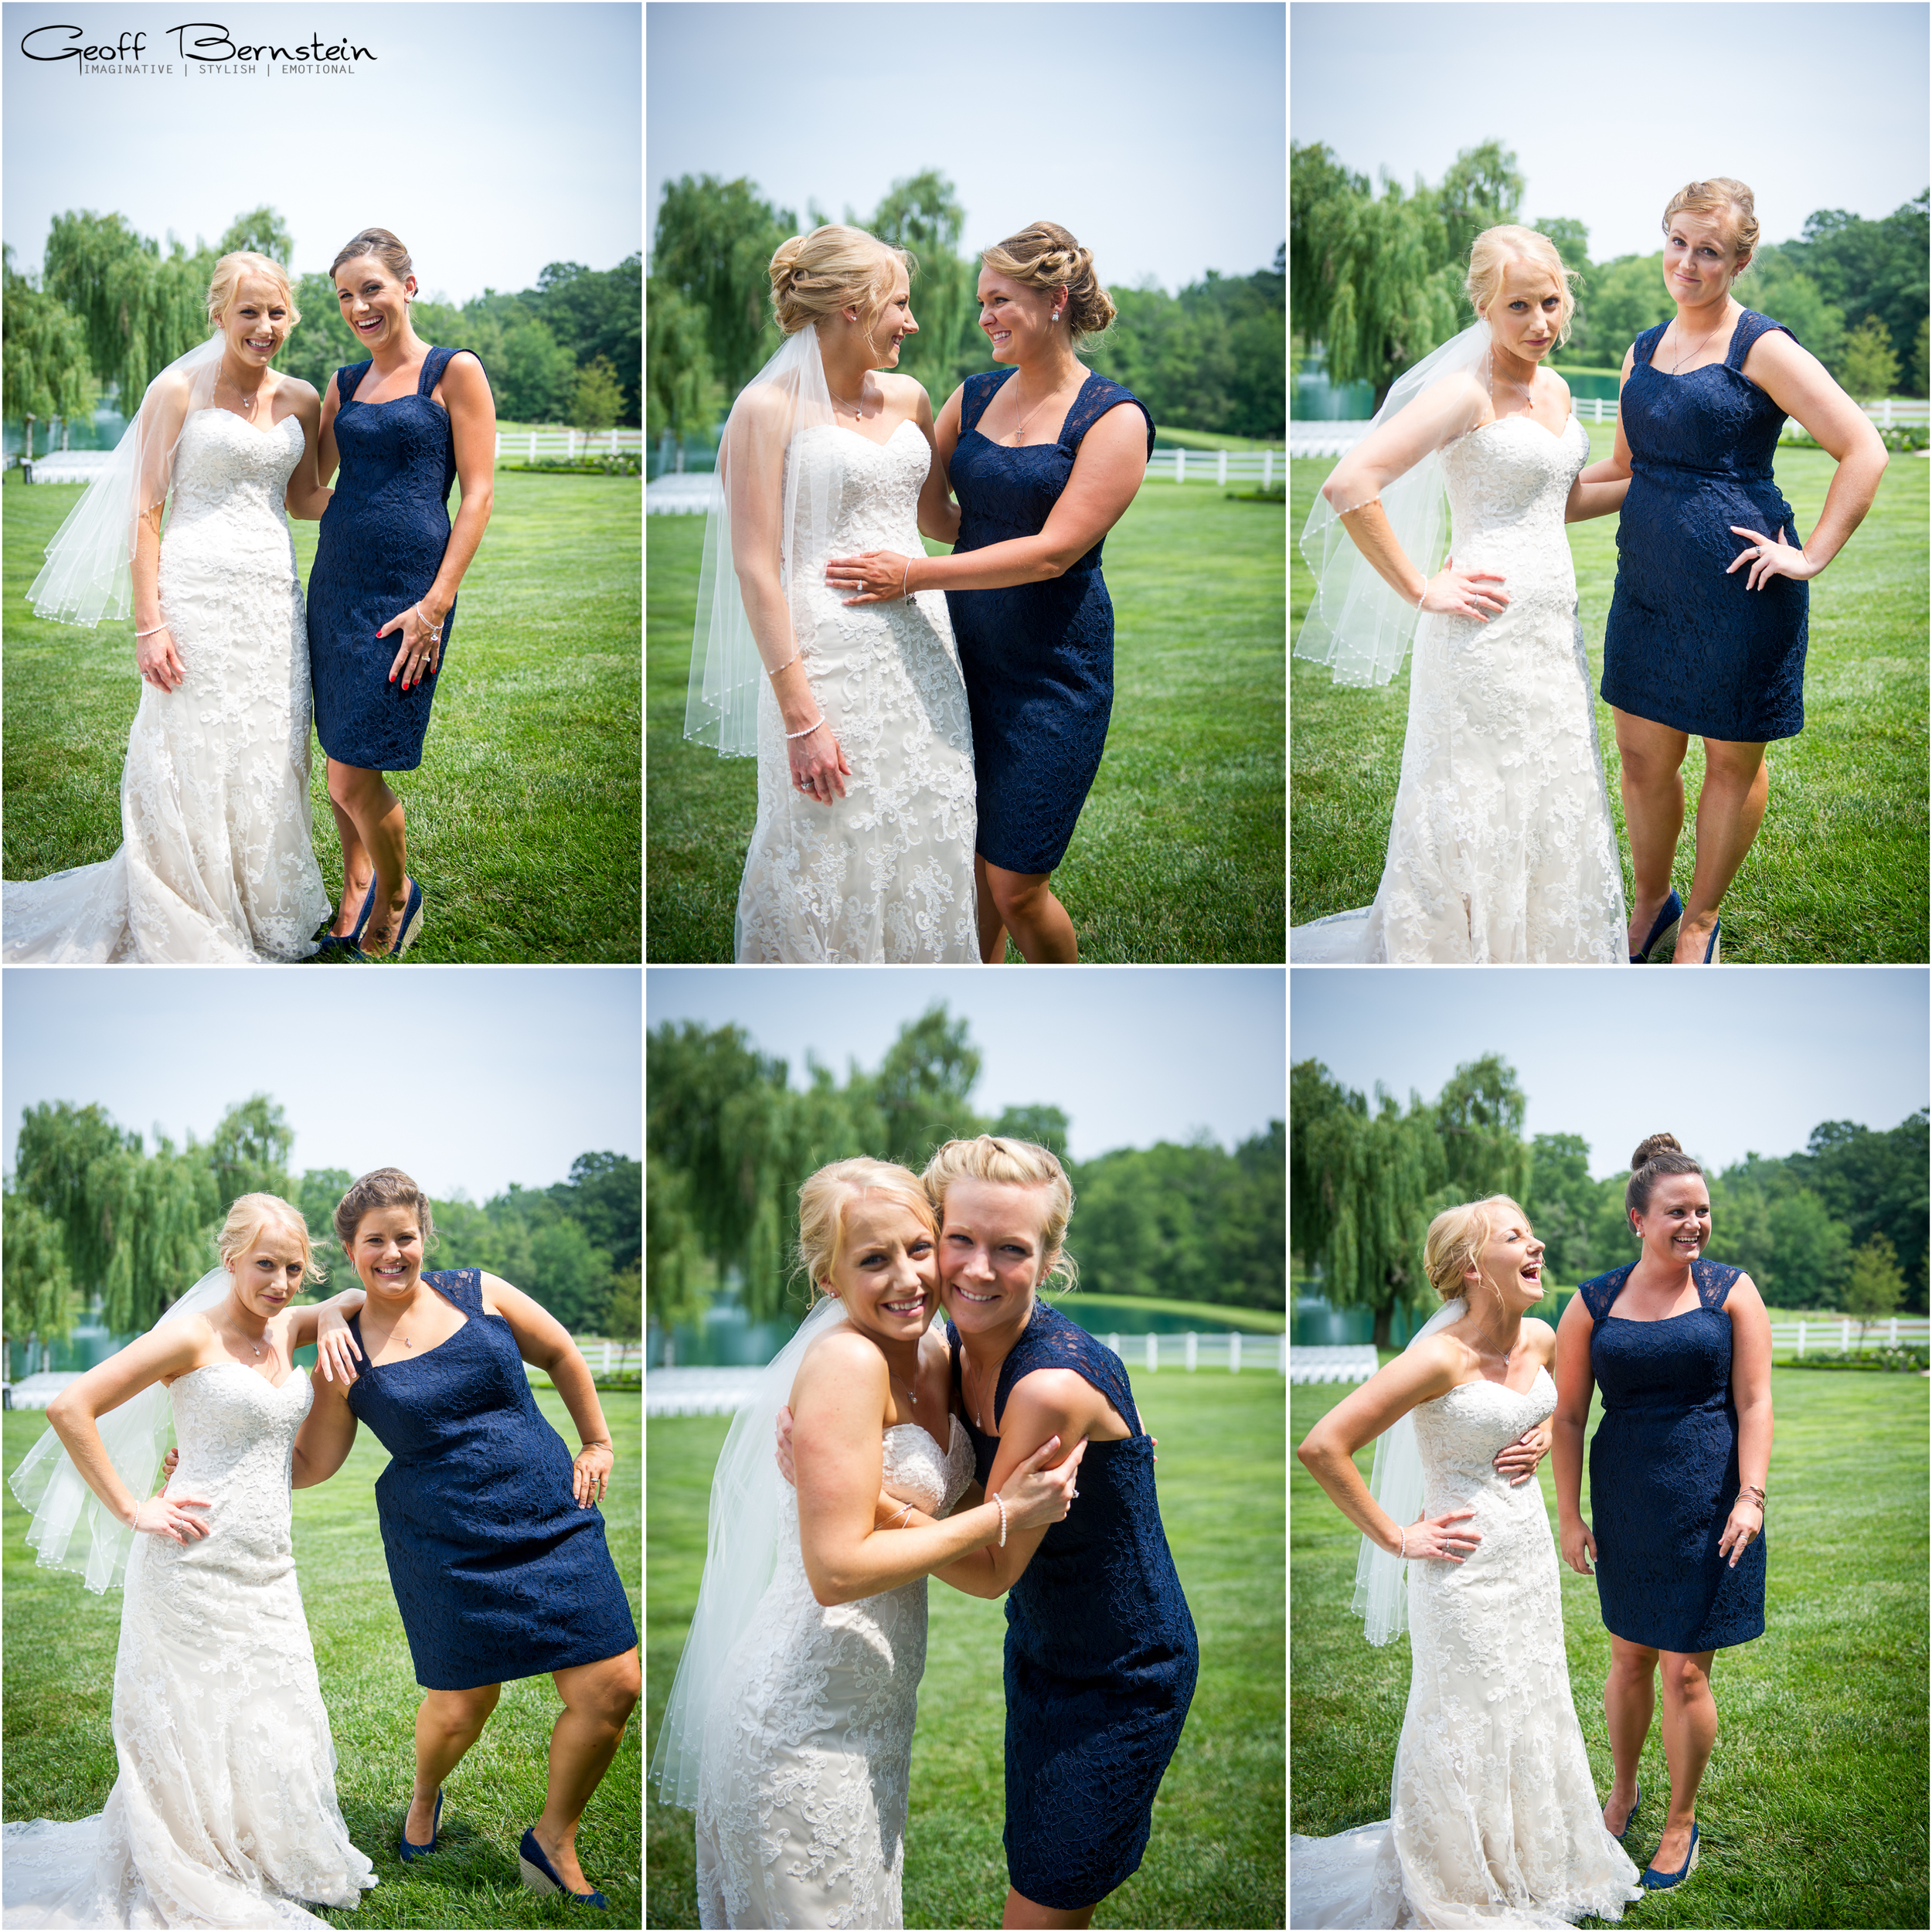 An Elegant Outdoor Wedding at the Pond View Farms by Geoff Bernstein Photography || www.gbmemories.com